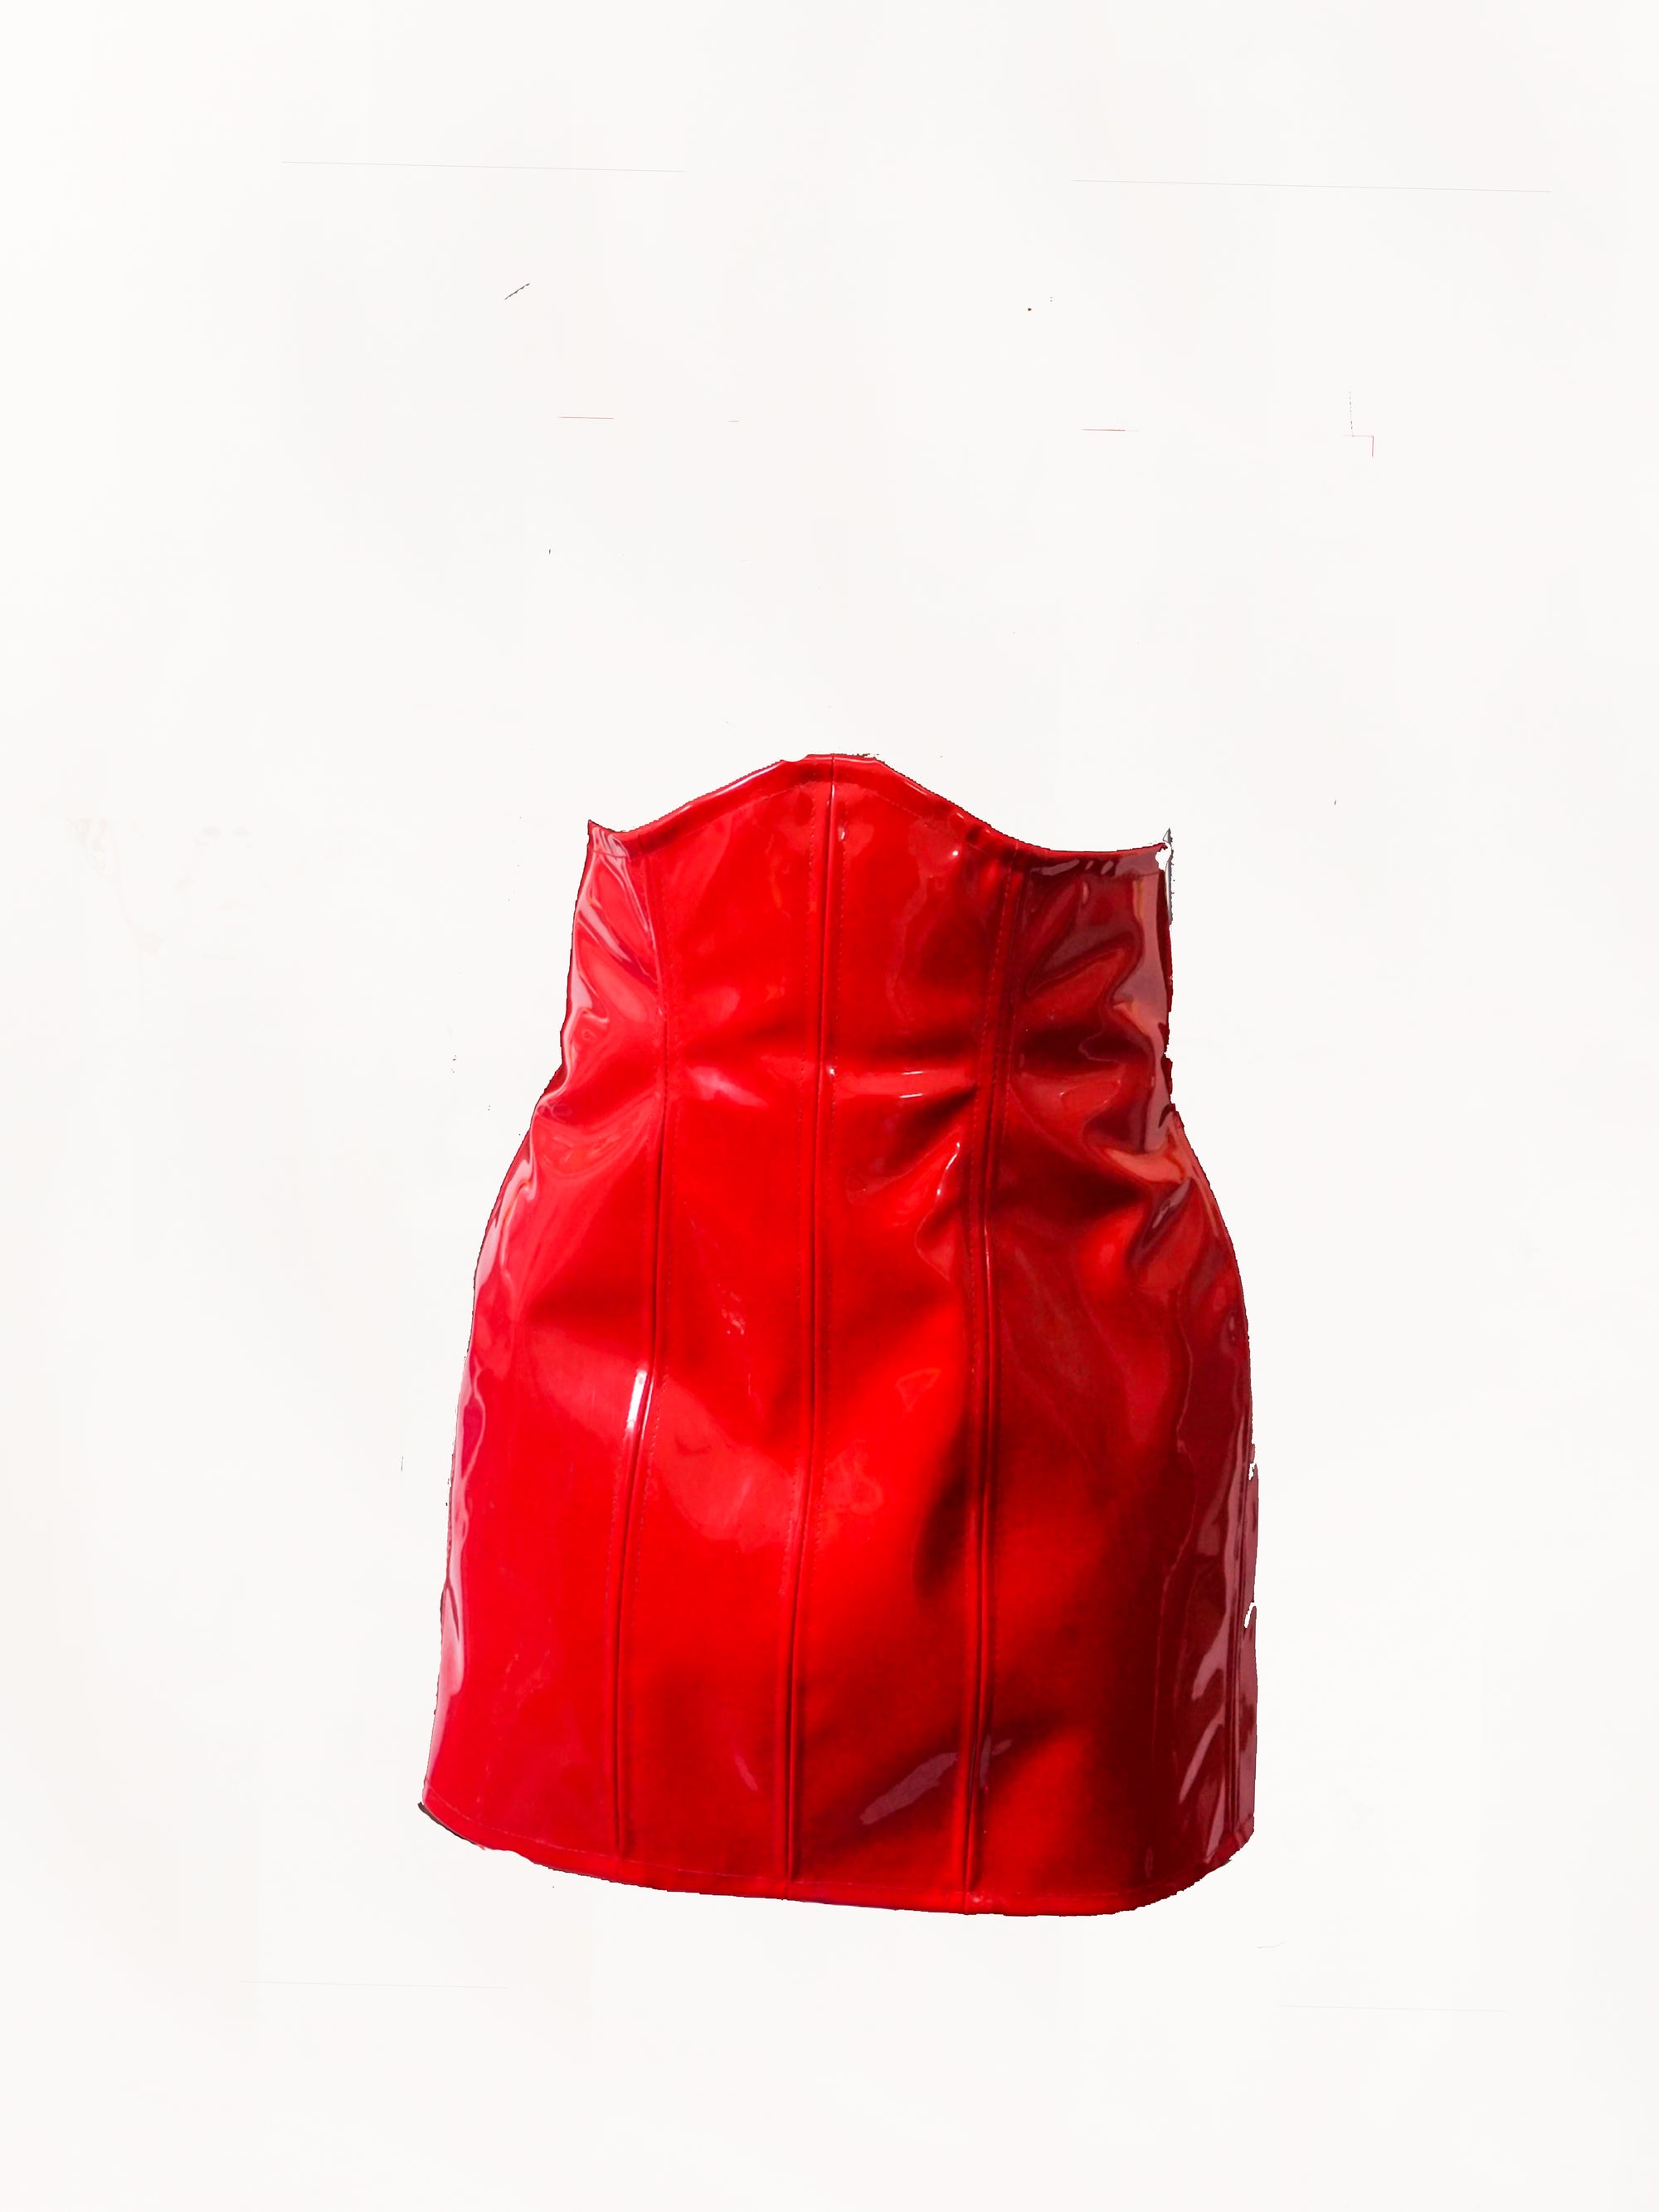 Corset Skirt - Red by GrayScale